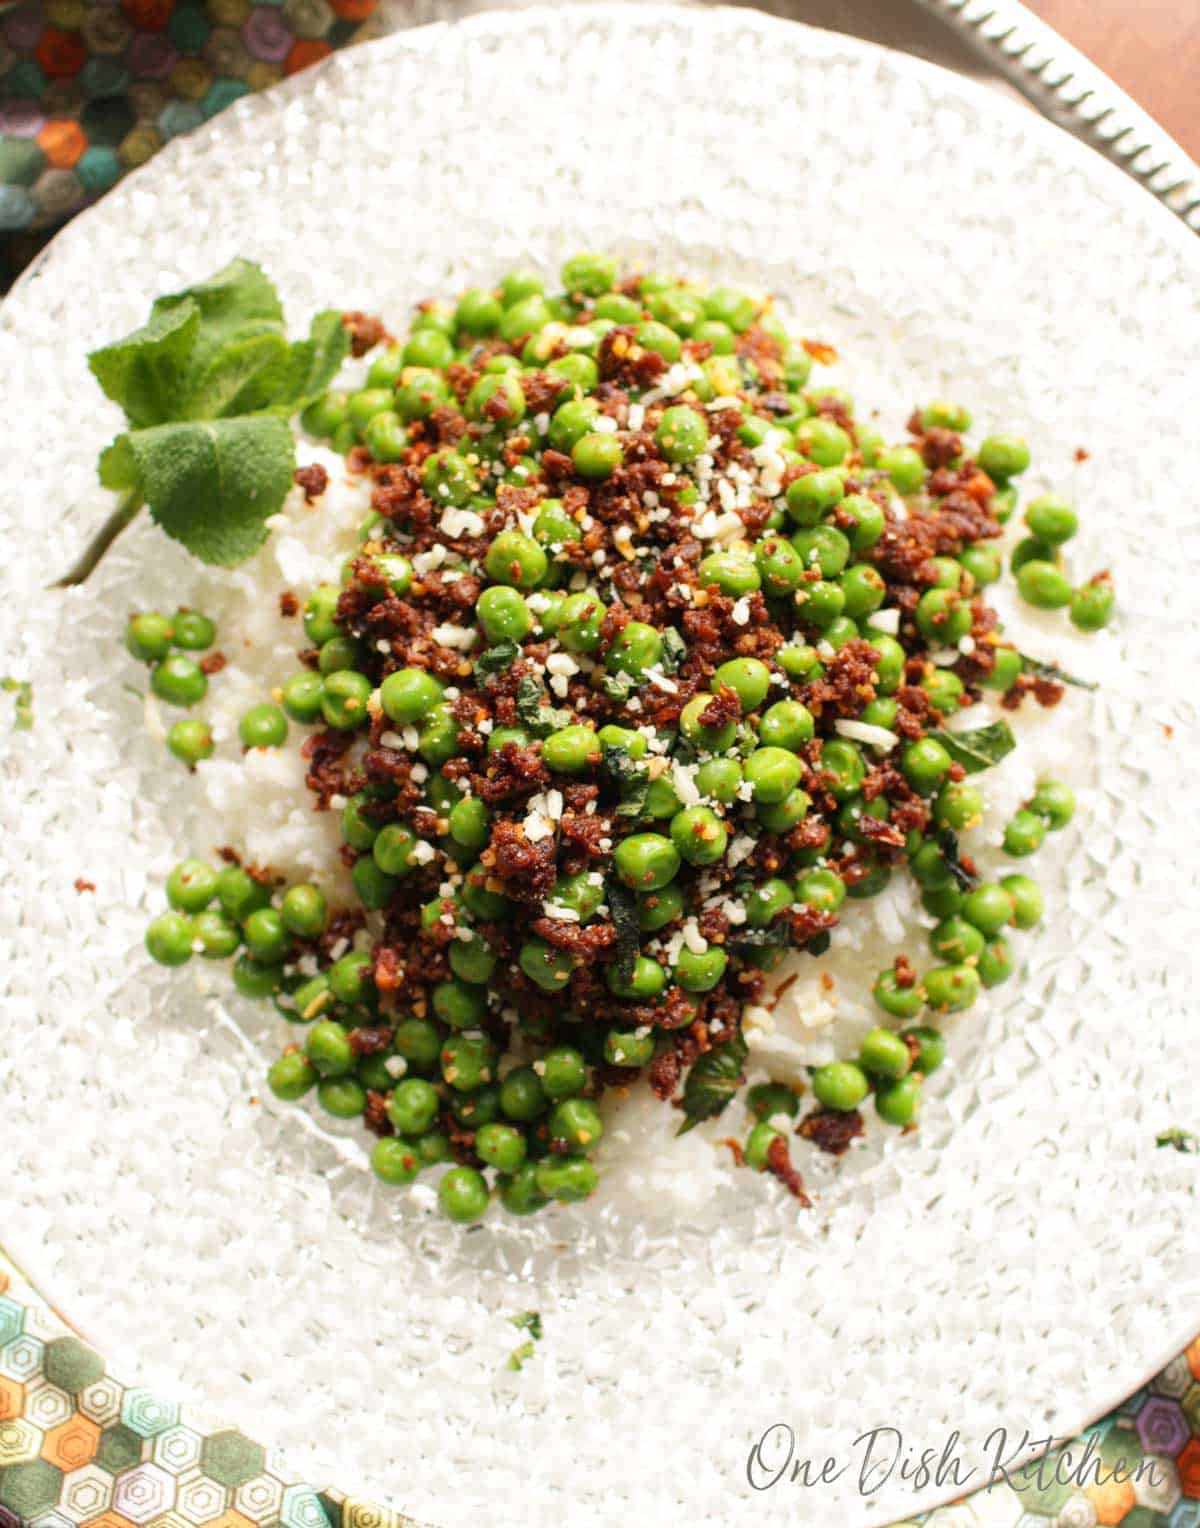 Overhead view of peas with chorizo, cotija cheese crumbles, and mint leaves over white rice on a clear glass plate.